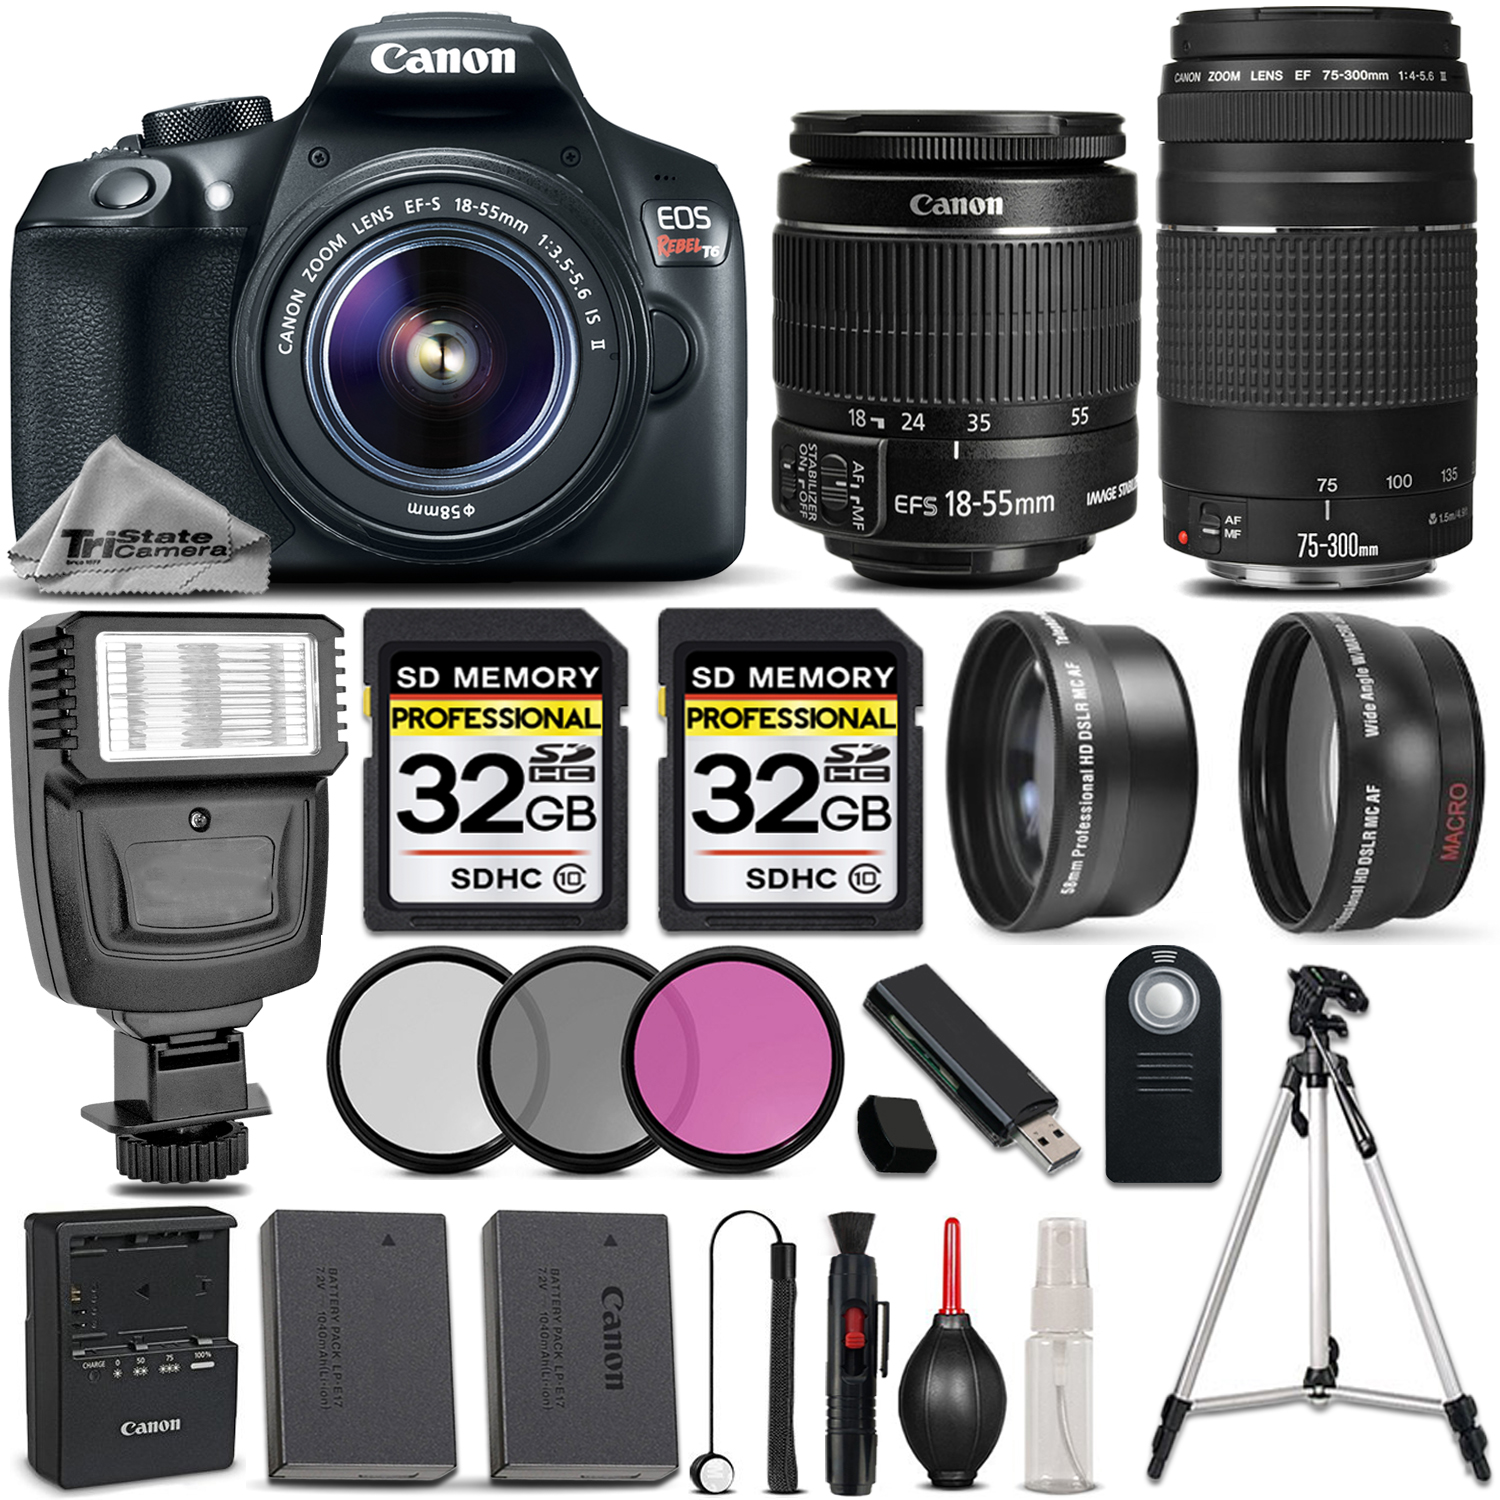 EOS Rebel T6 DSLR Camera + 18-55mm Lens +Canon 75-300 III &MORE -64GB KIT *FREE SHIPPING*